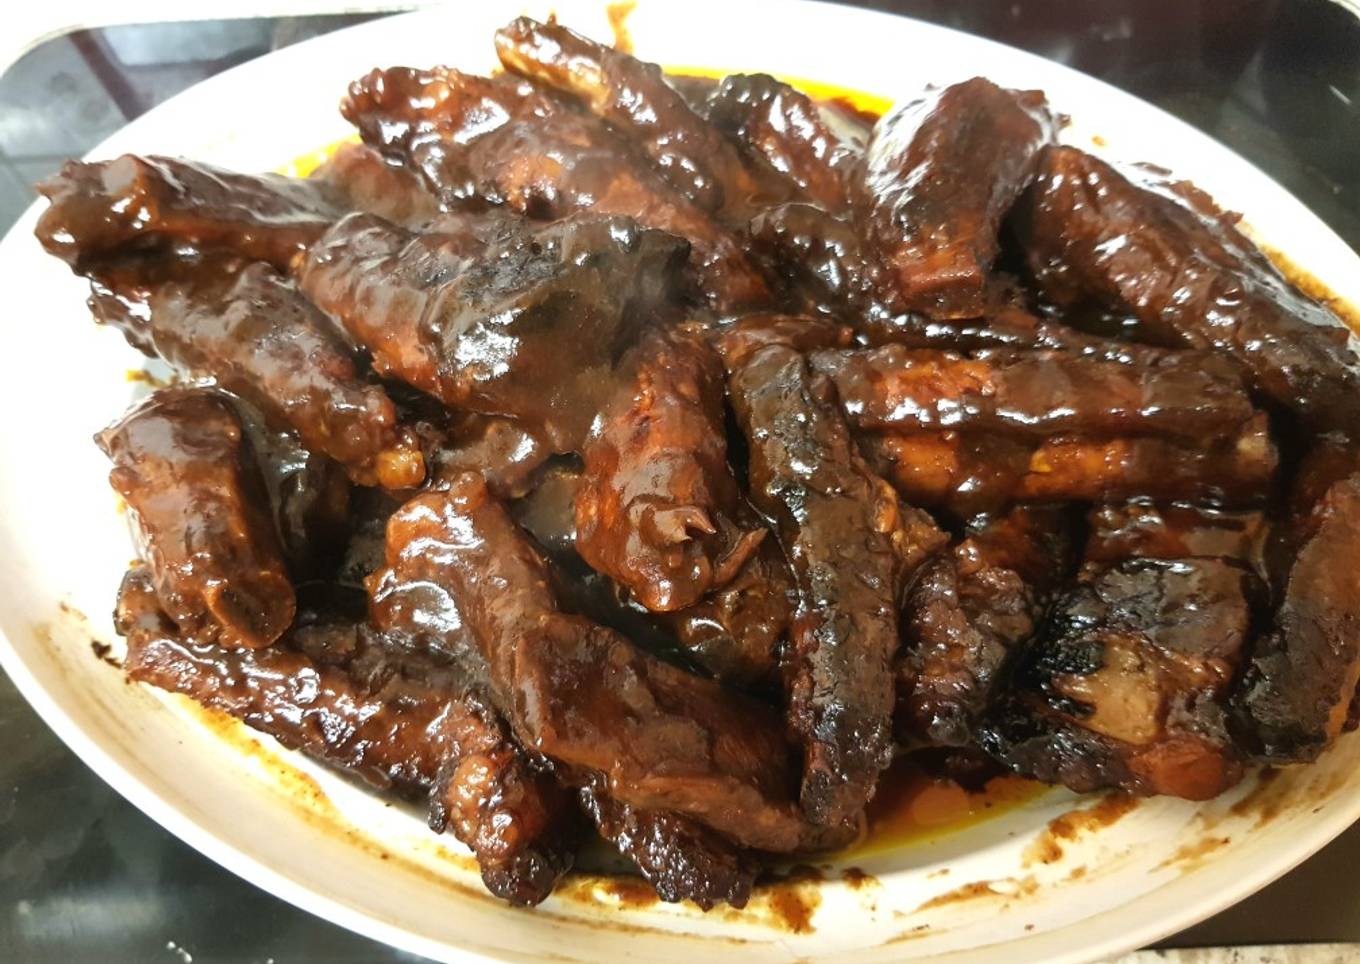 My Lovely Spicy Rib sauce mixed with Smoked BBQ Sauce